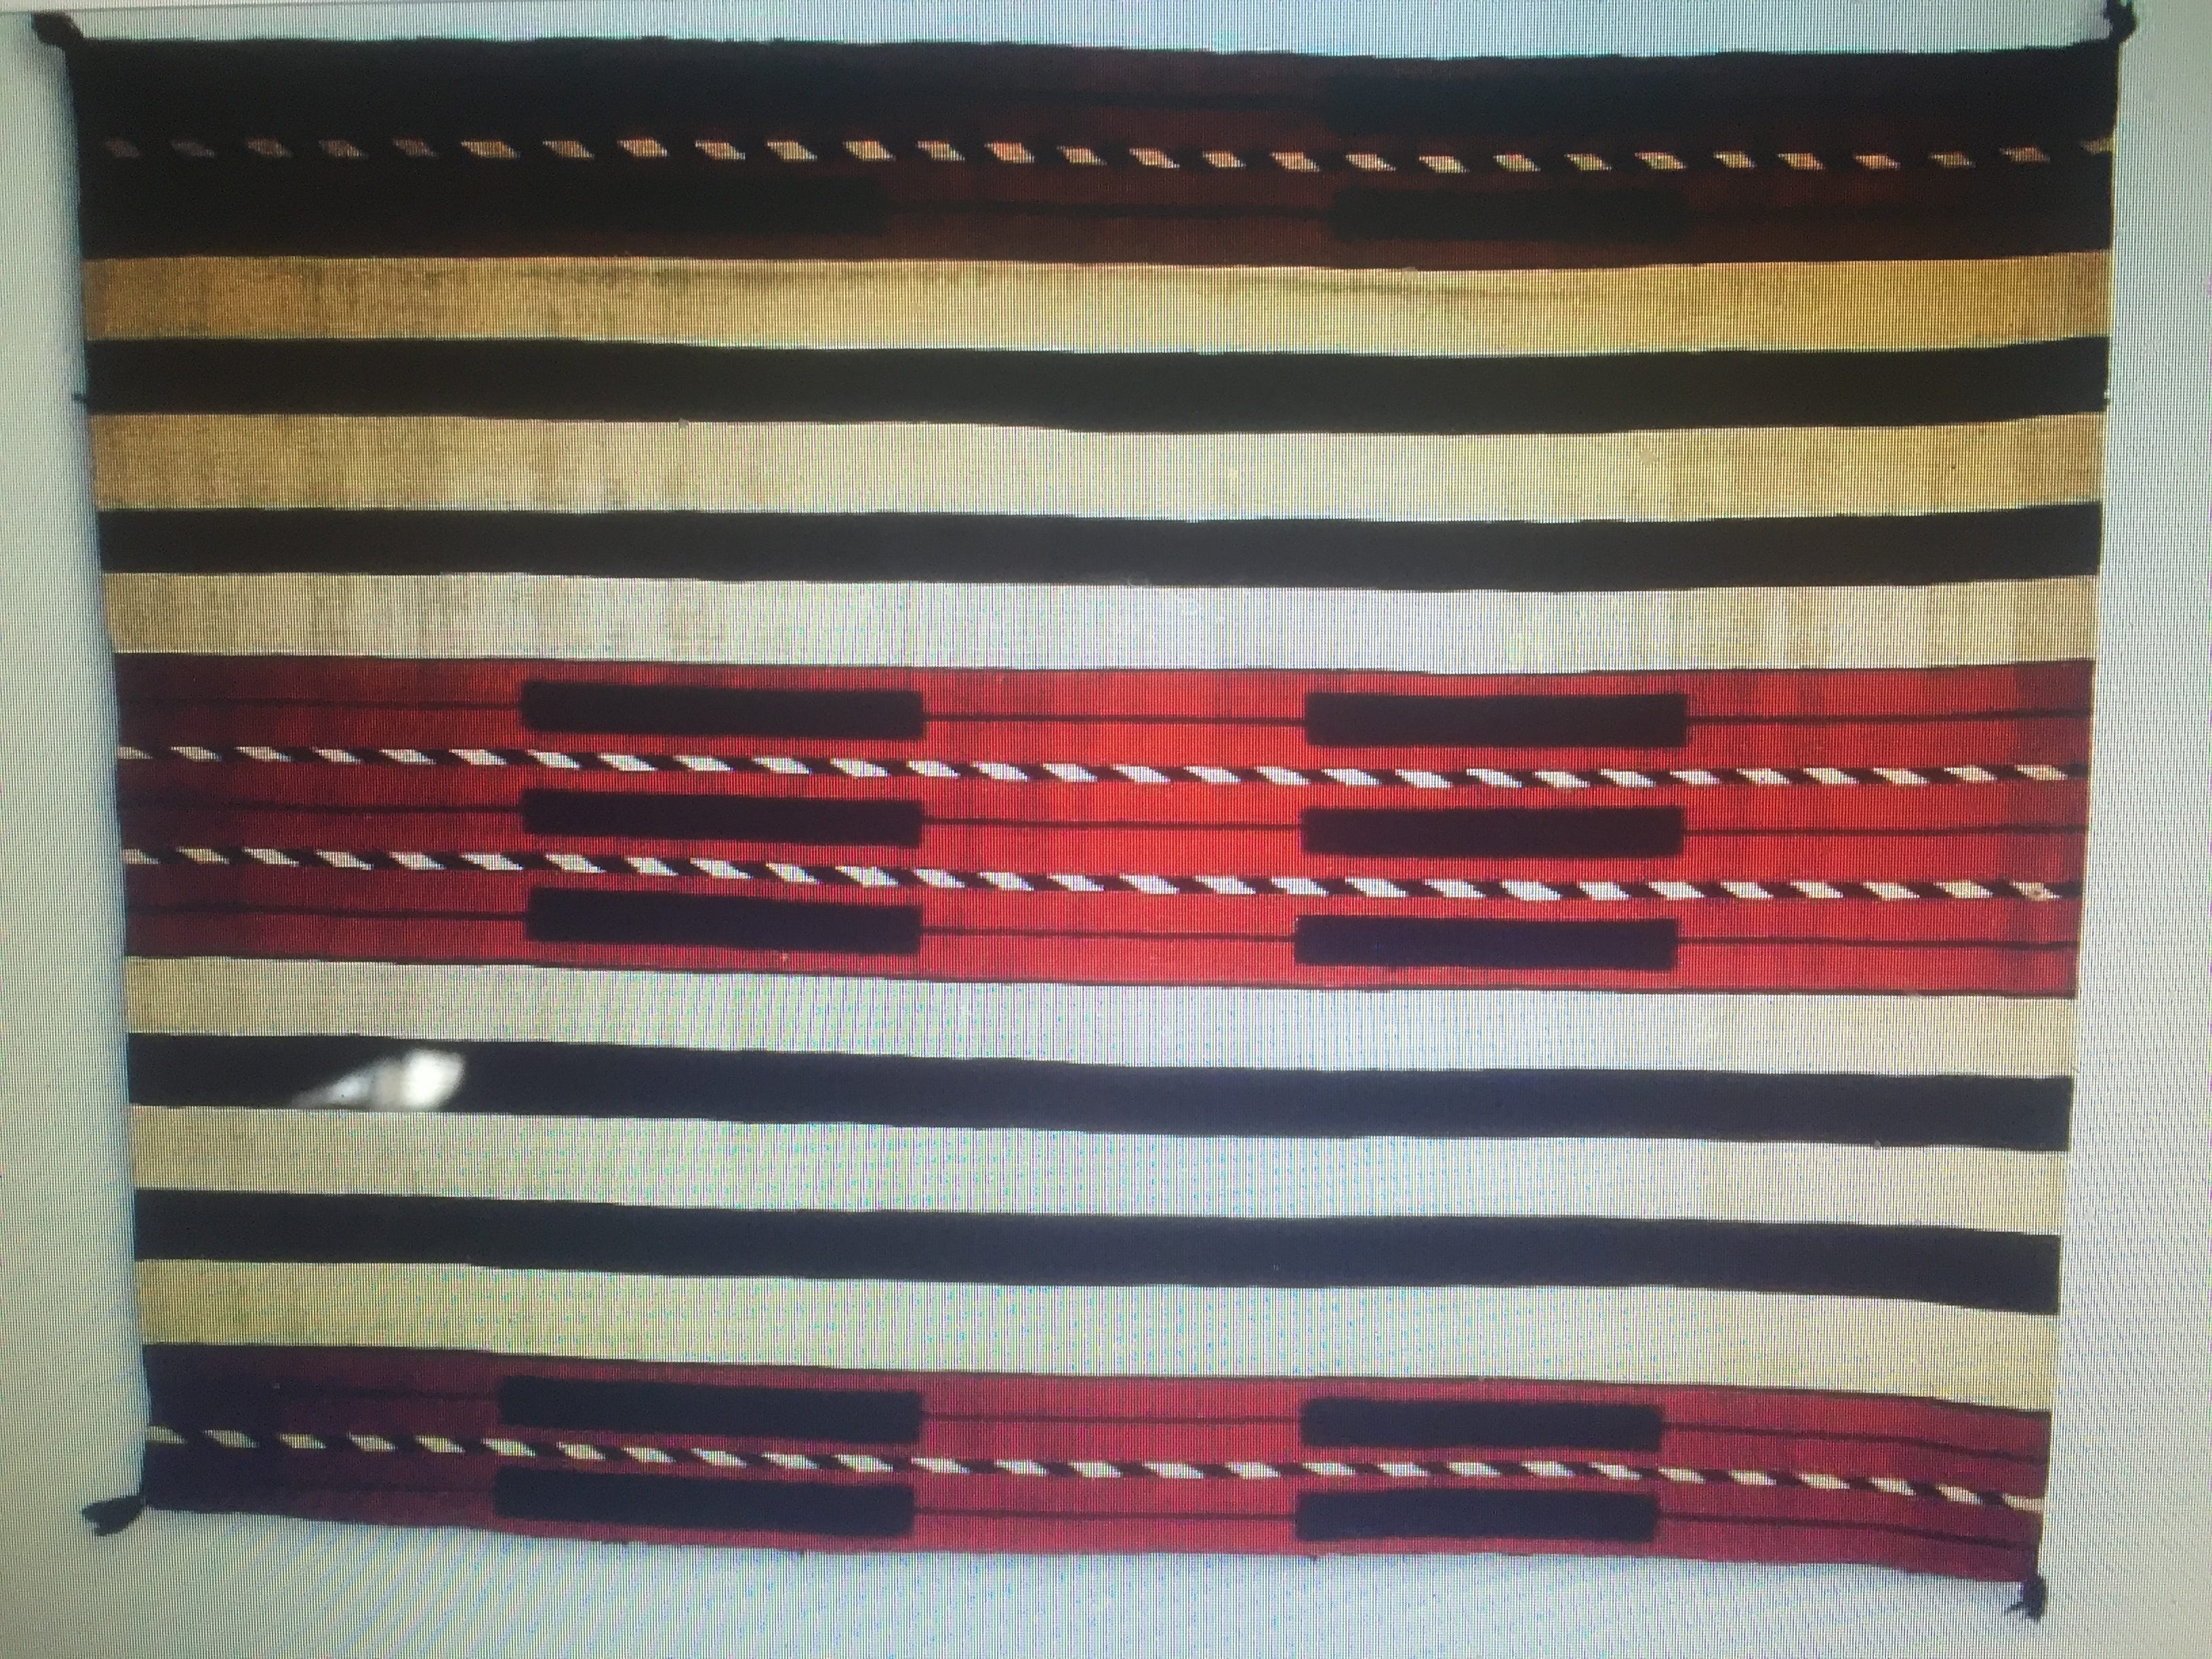 The Navajo blanket that went missing from the Amerind Museum on Aug. 27, 1989.